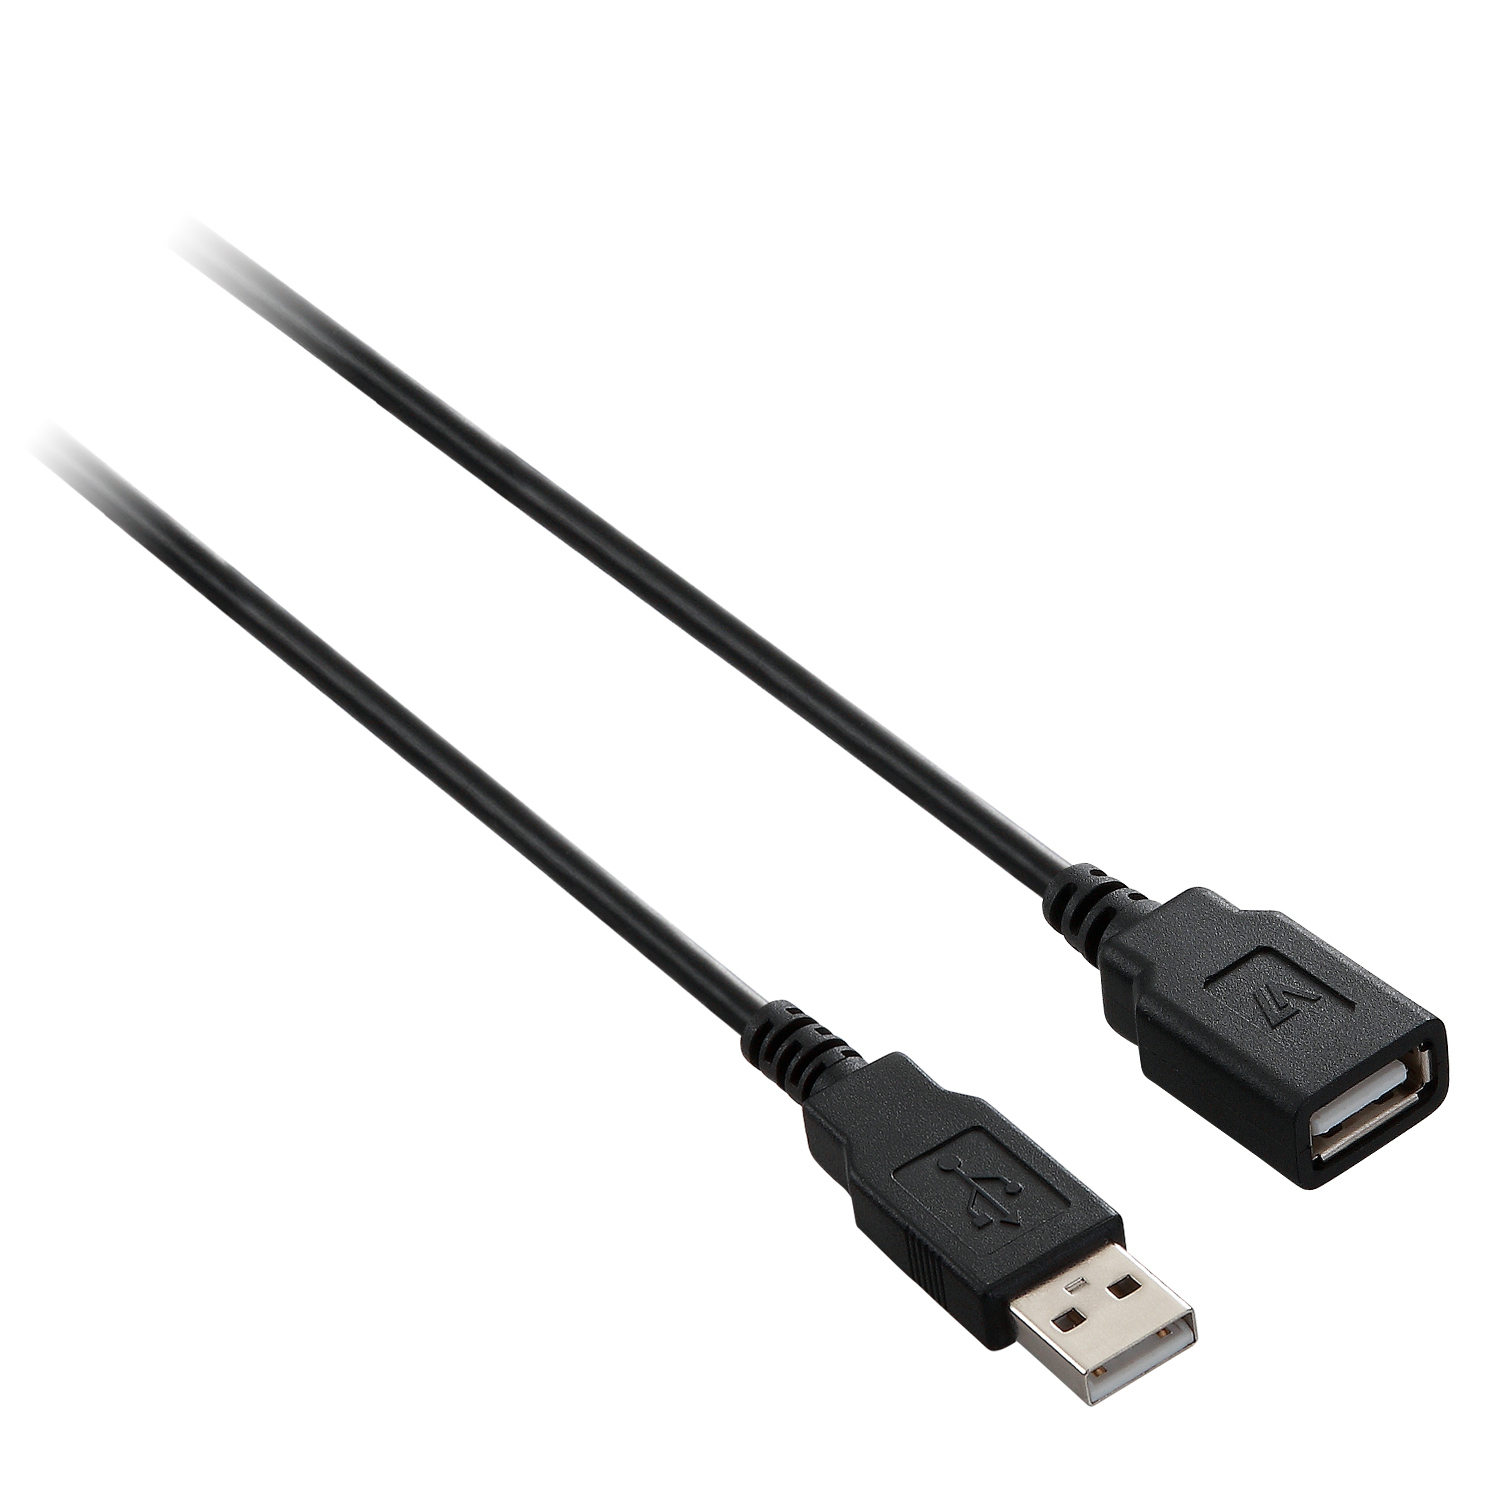 Photos - Cable (video, audio, USB) V7 Black USB Extension Cable USB 2.0 A Female to USB 2.0 A Male 1.8m 6 V7E 